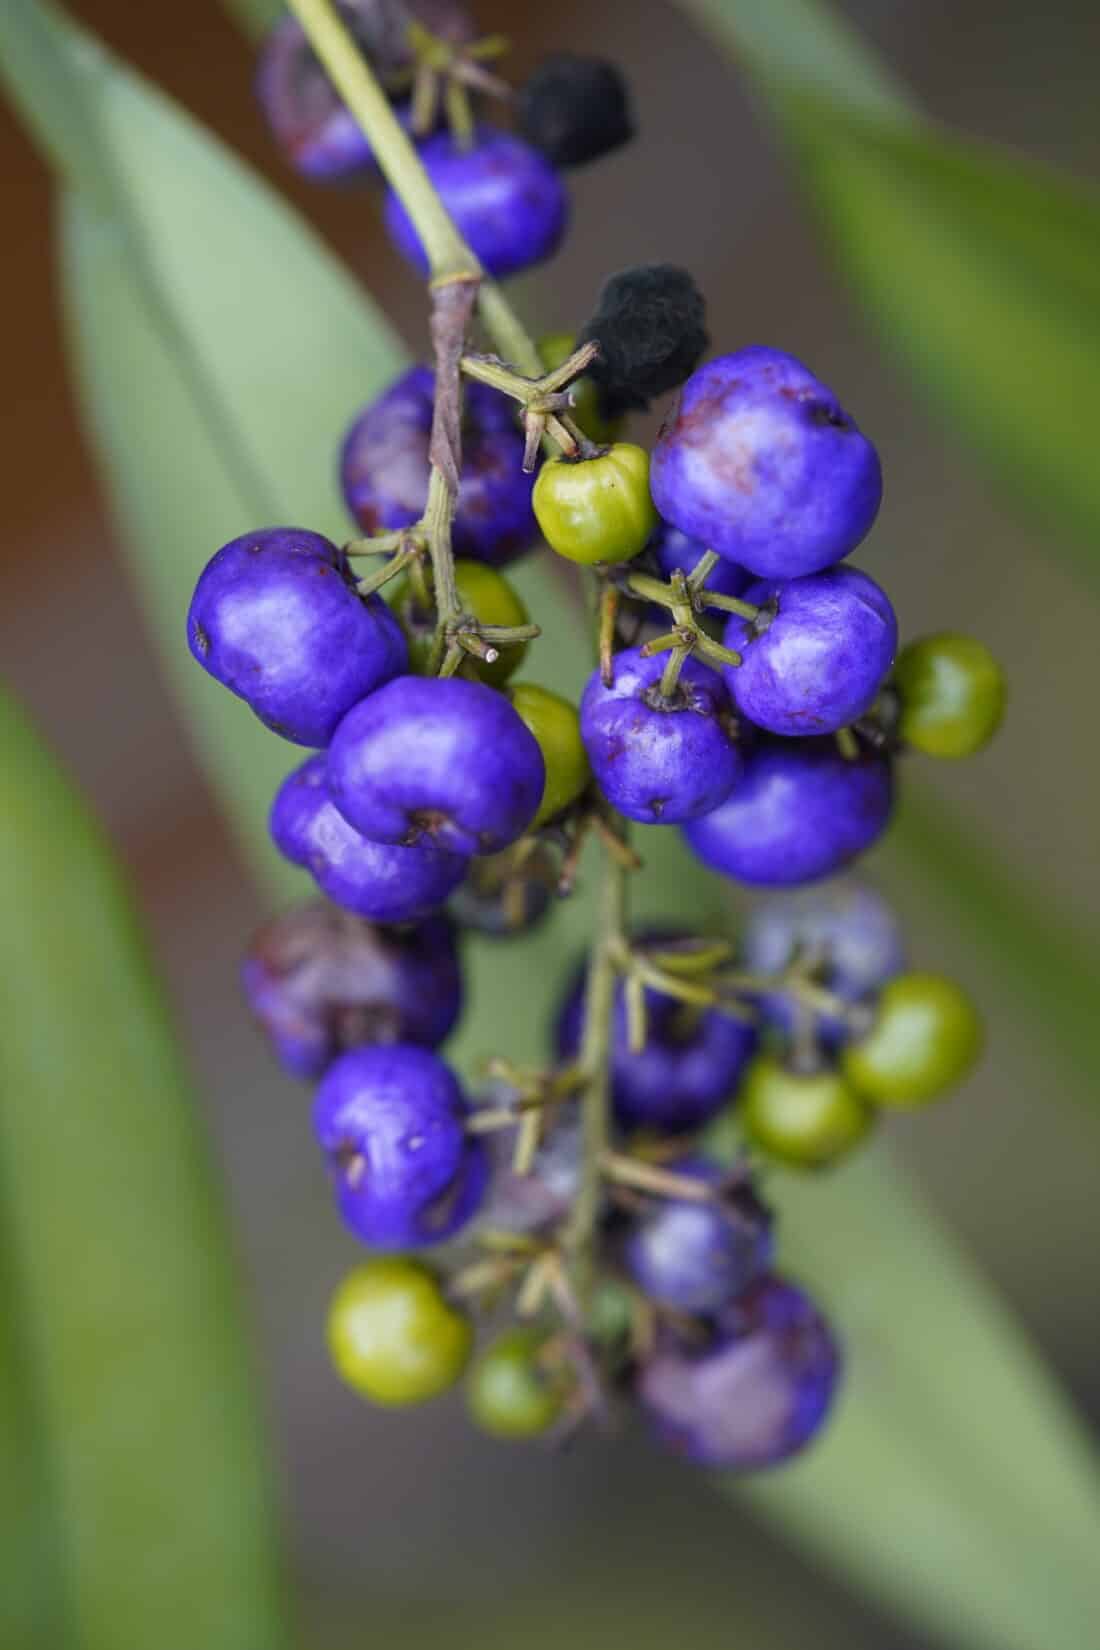 A bunch of blue and green berries on a plant.